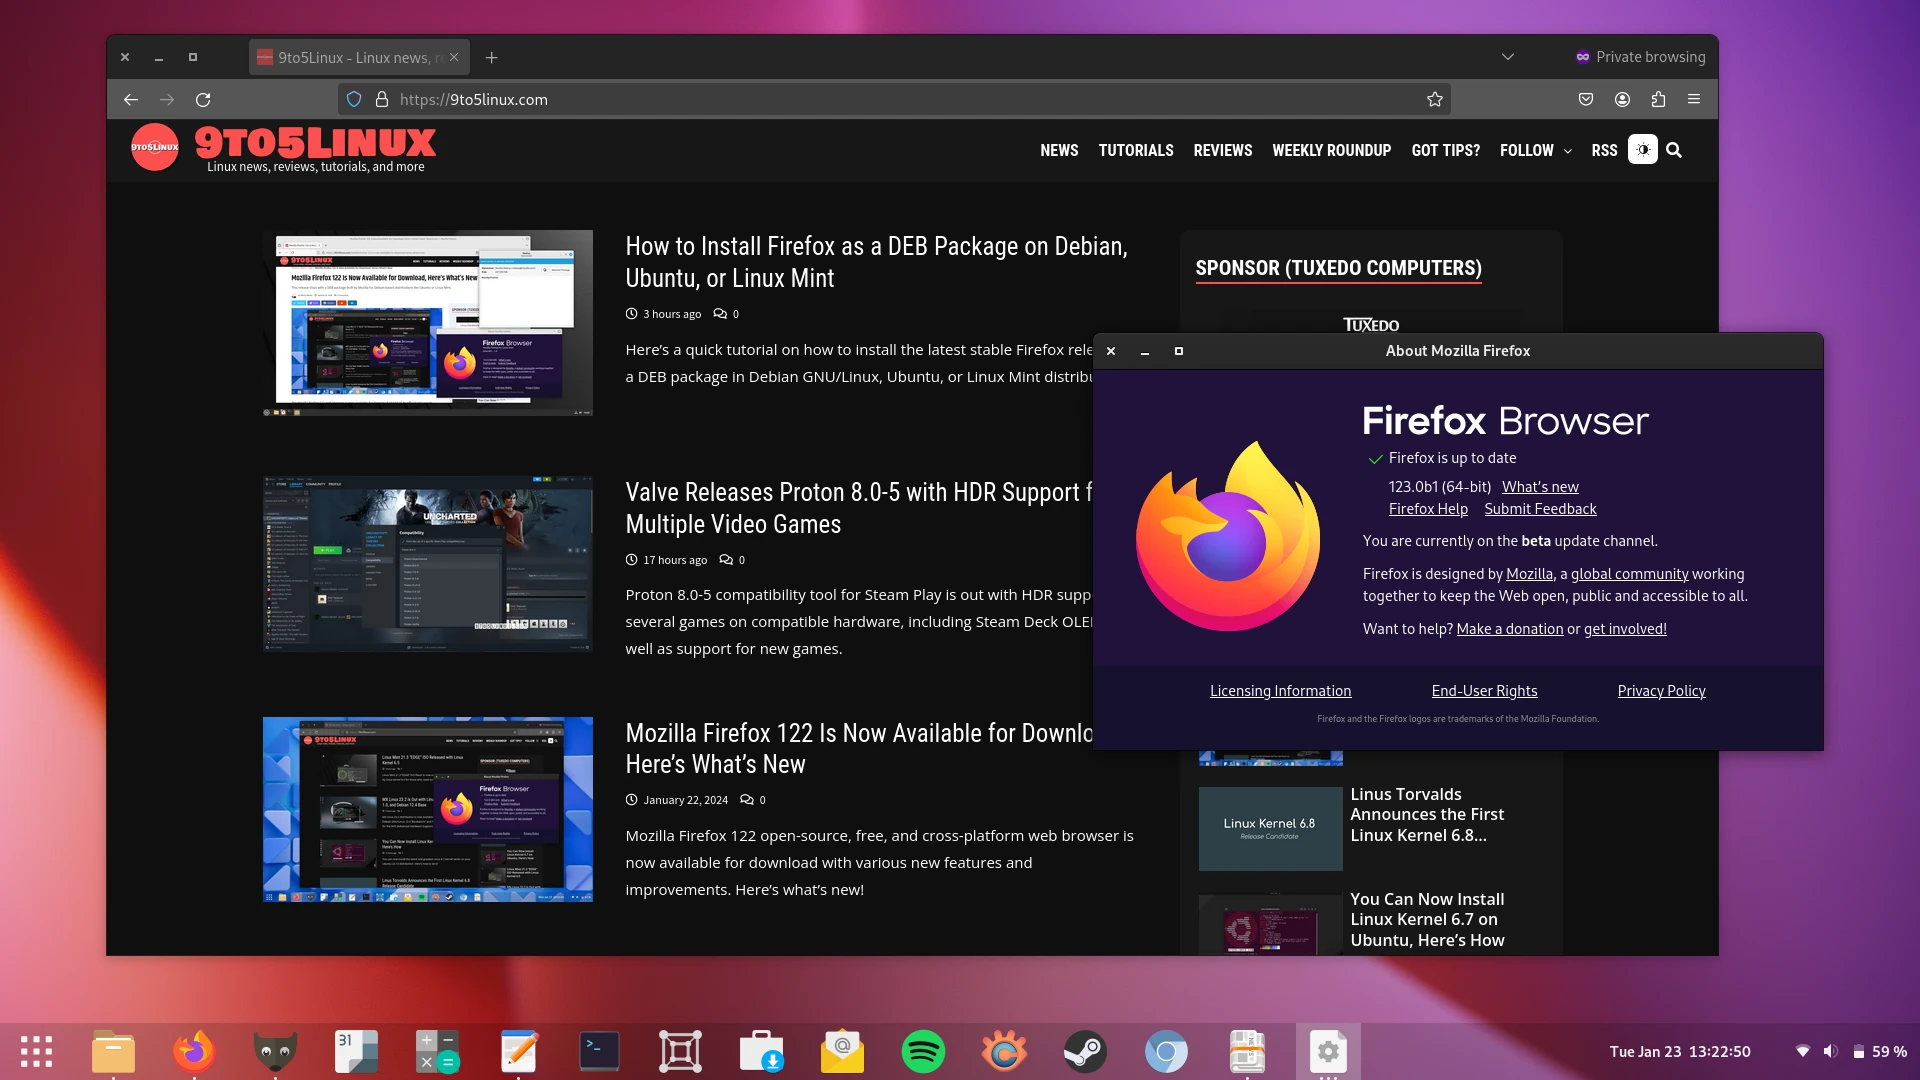 Mozilla Firefox 123 Enters Public Beta Testing, Here’s What to Expect